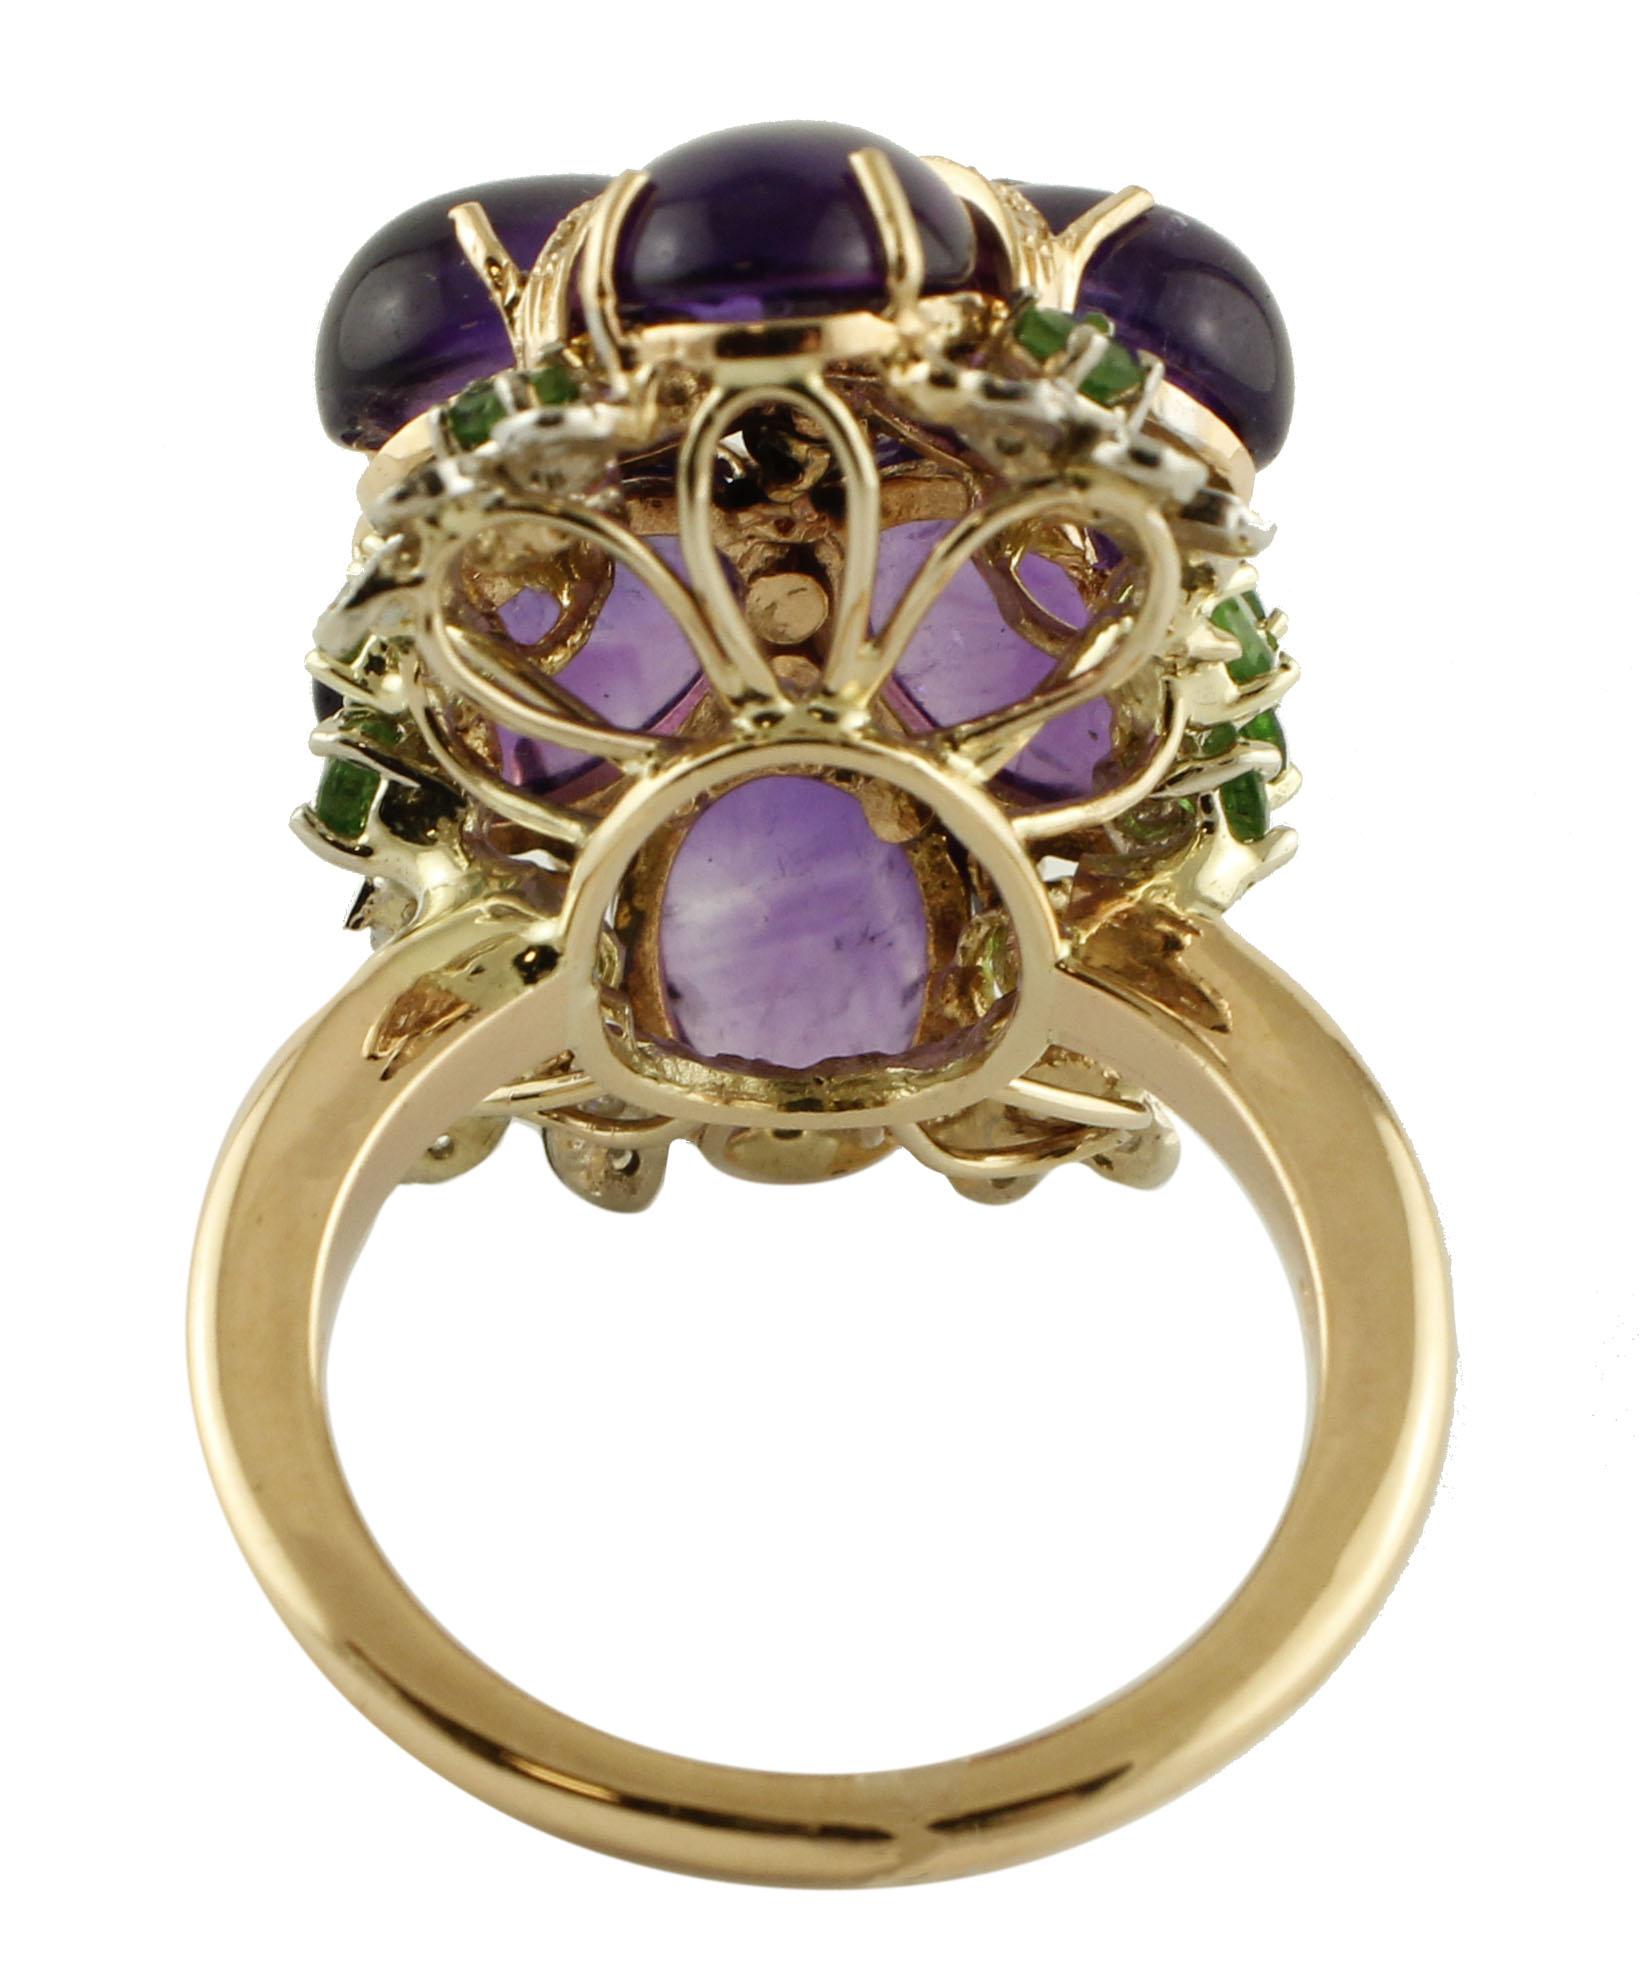 0.30 Carat Diamonds, 16.57 Carat Amethyst and Tsavorites Rose Gold Fashion Ring In Excellent Condition For Sale In Marcianise, Marcianise (CE)